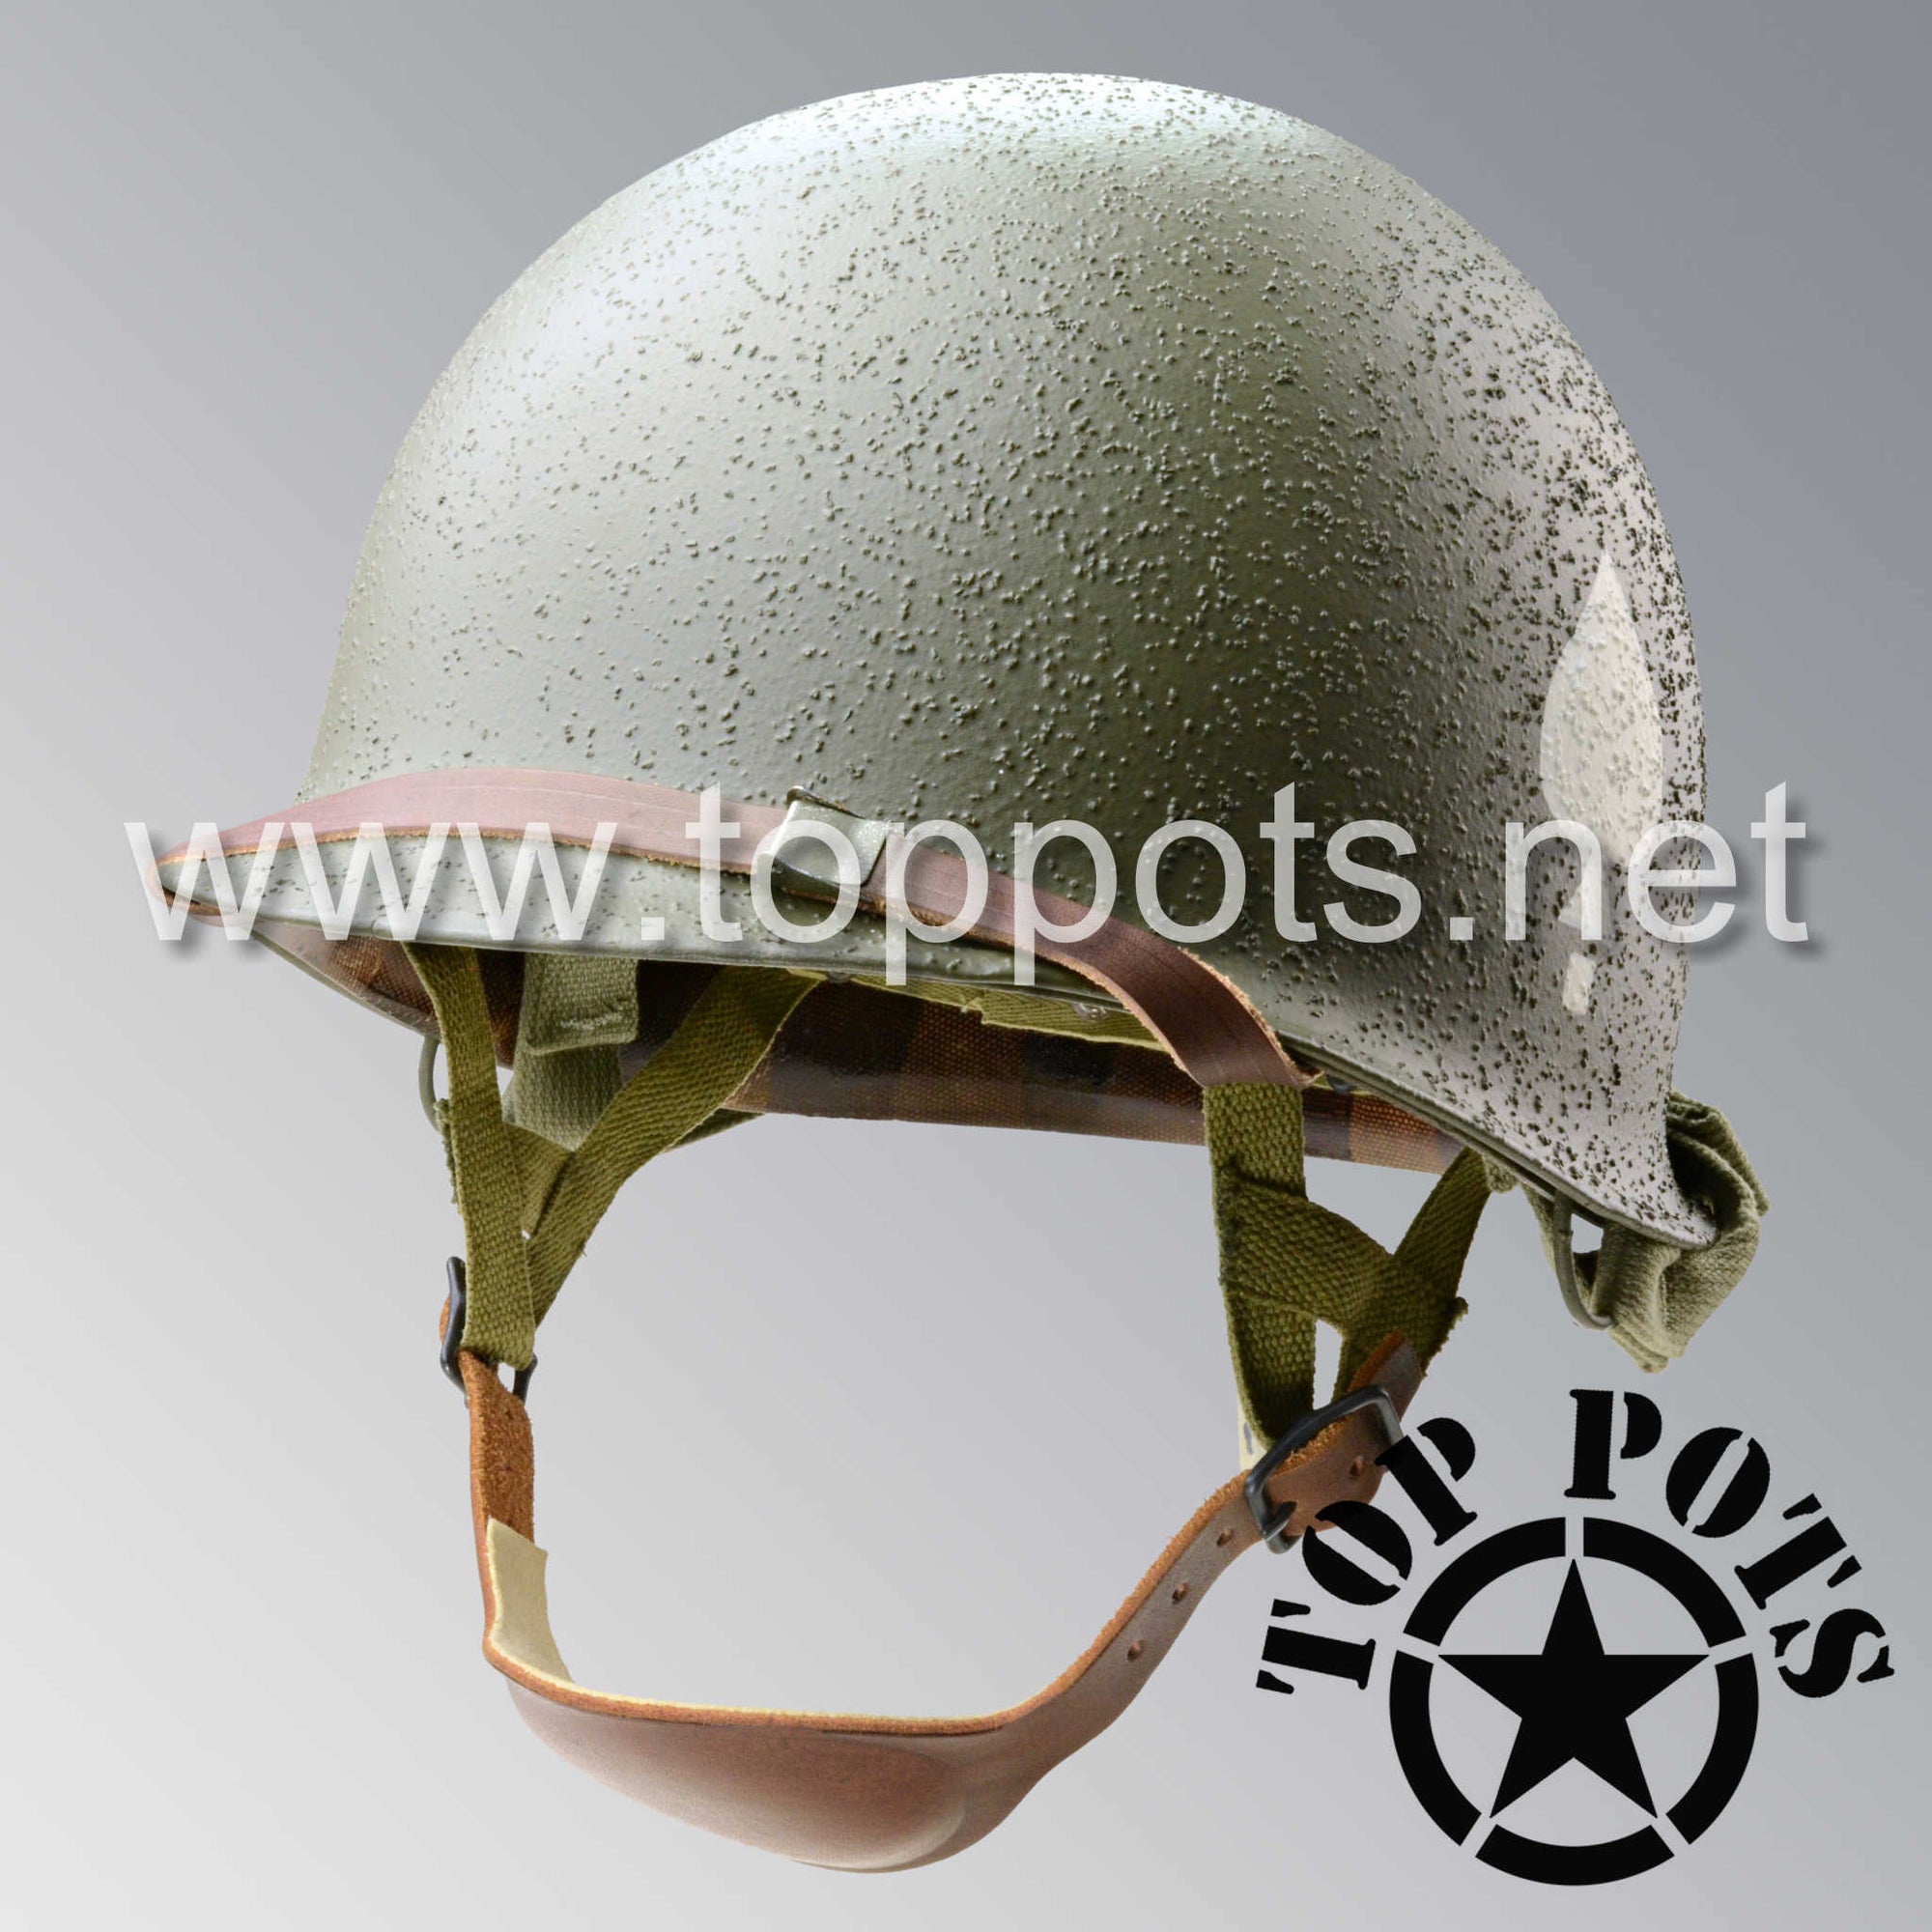 WWII US Army Restored Original M2 Paratrooper Airborne Helmet D Bale Shell and Liner with 506th 2nd Battalion PIR Emblem